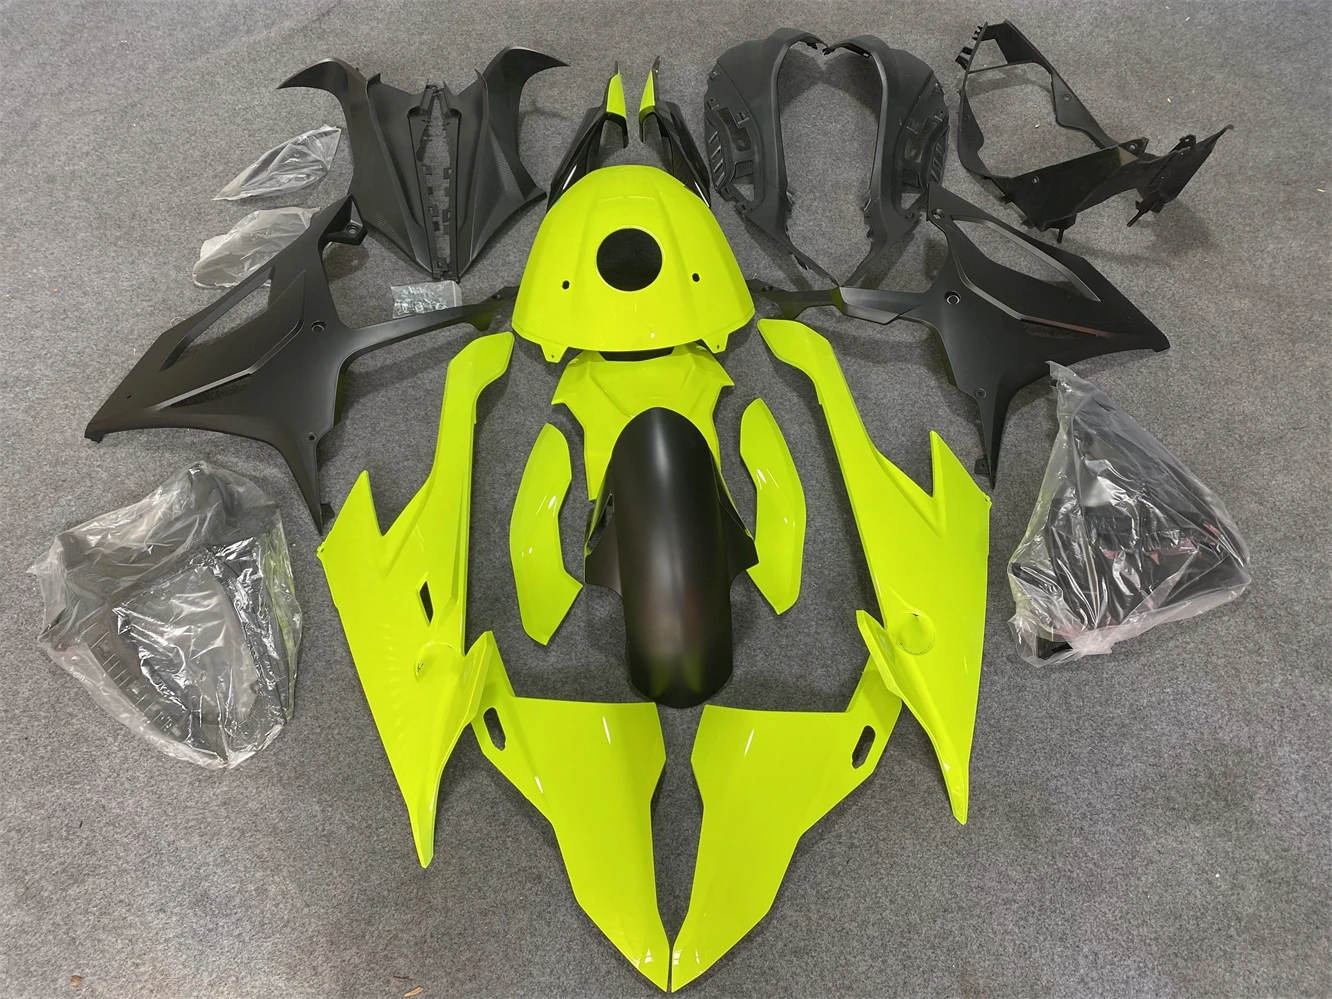 

Fairings Kit Fit For M1000RR S1000rr 2019 2020 2021 2022 2023 Bodywork Set 19 20 22 23High Quality Injection Fluorescent yellow